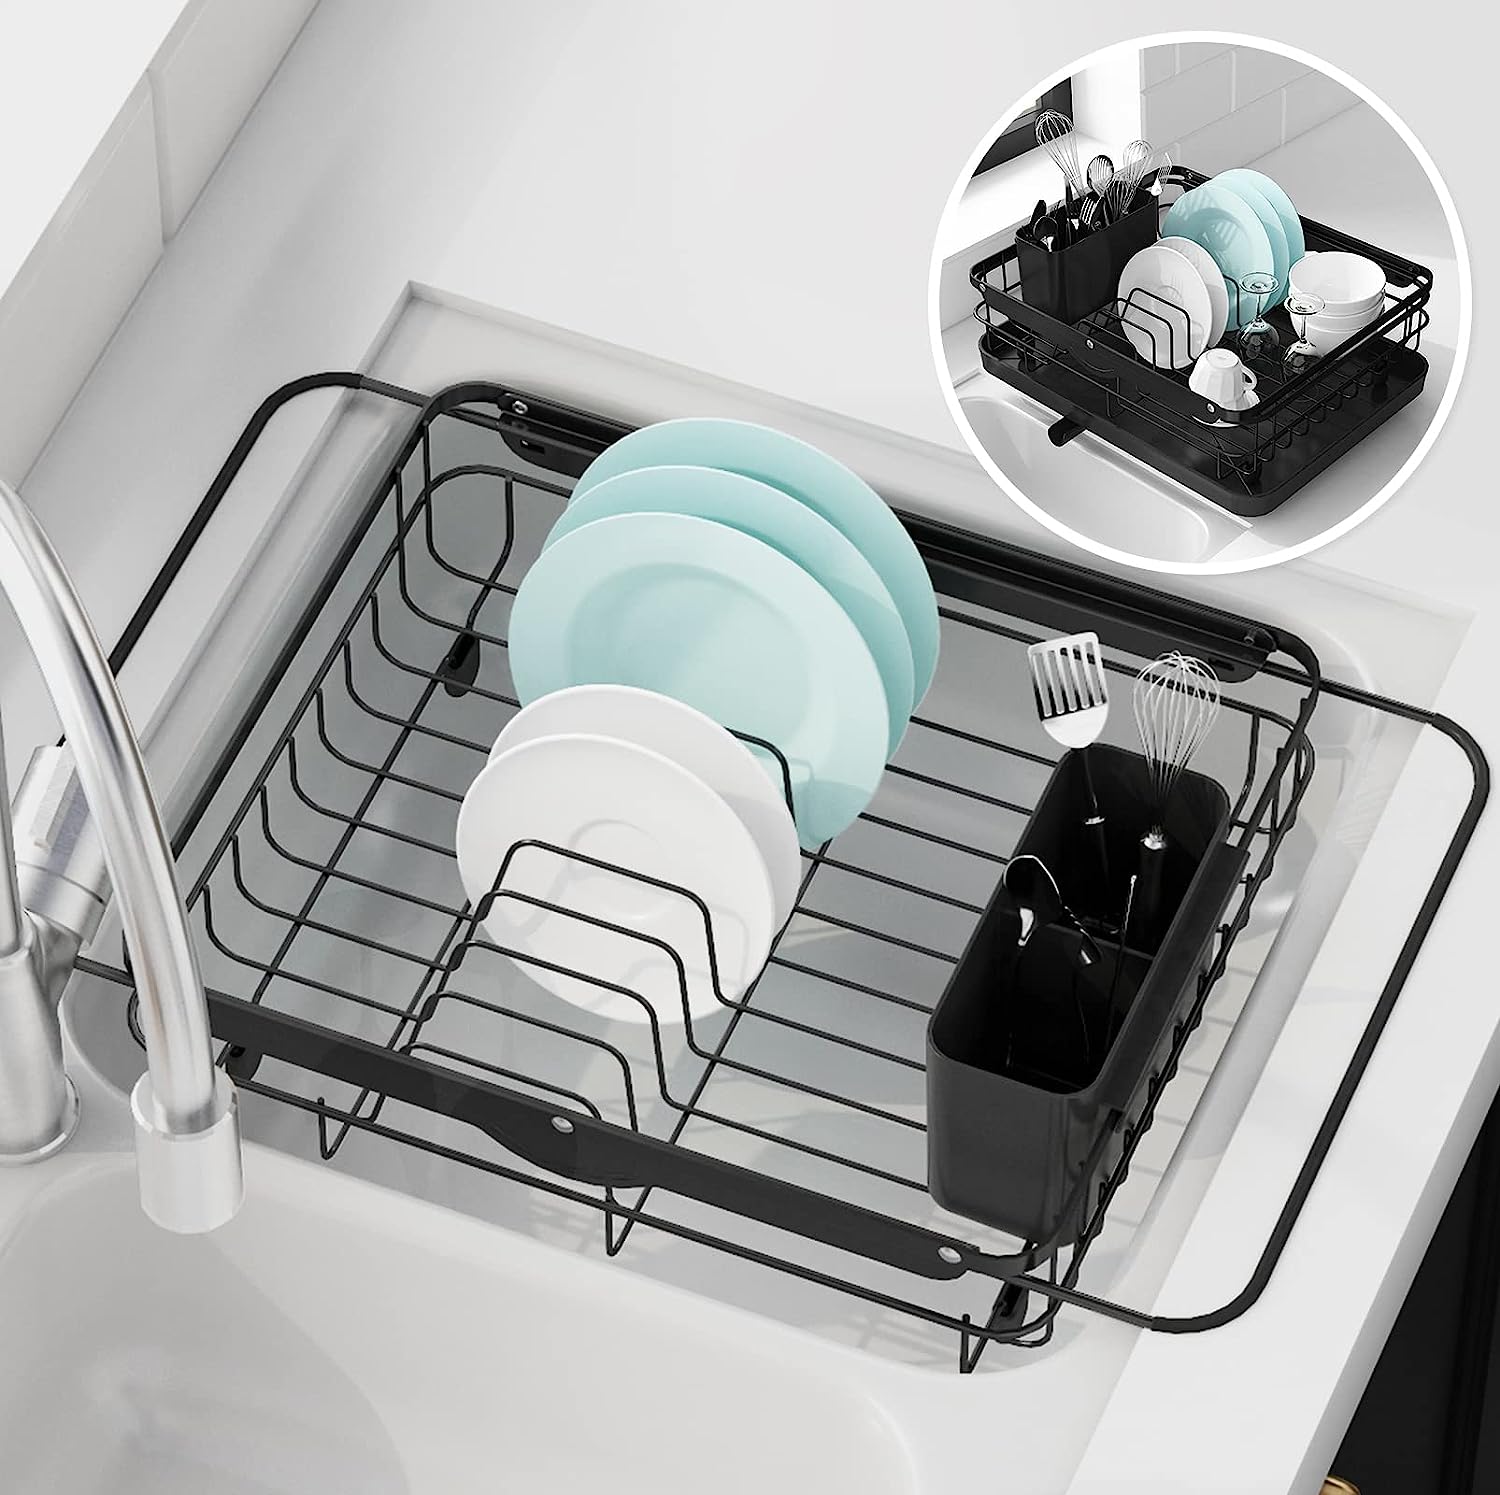 Kitsure Dish Drying Rack in Sink - Dual-Use for [...]